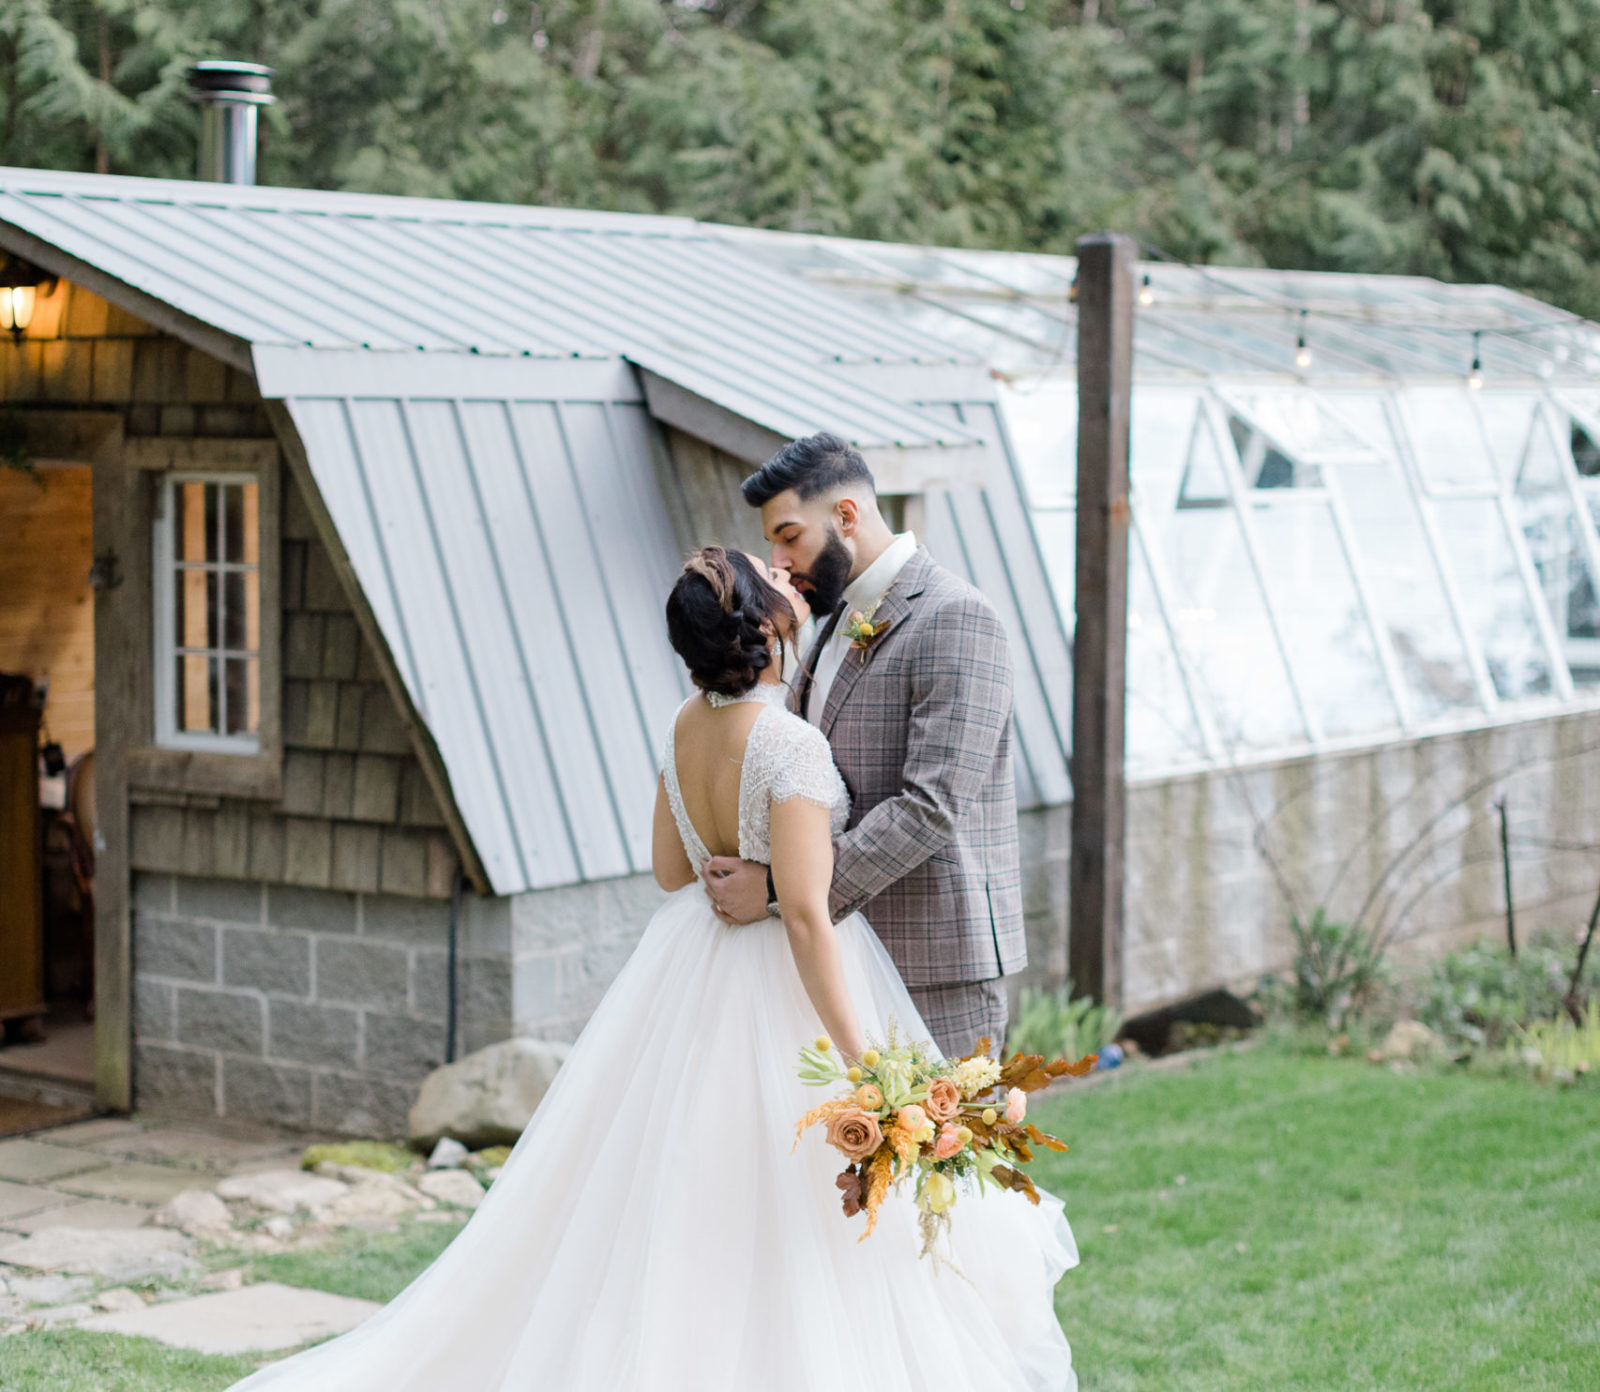 Whimsical Greenhouse Wedding Inspiration with a Palette of Butterscotch & Blue | Featured on Brontë Bride